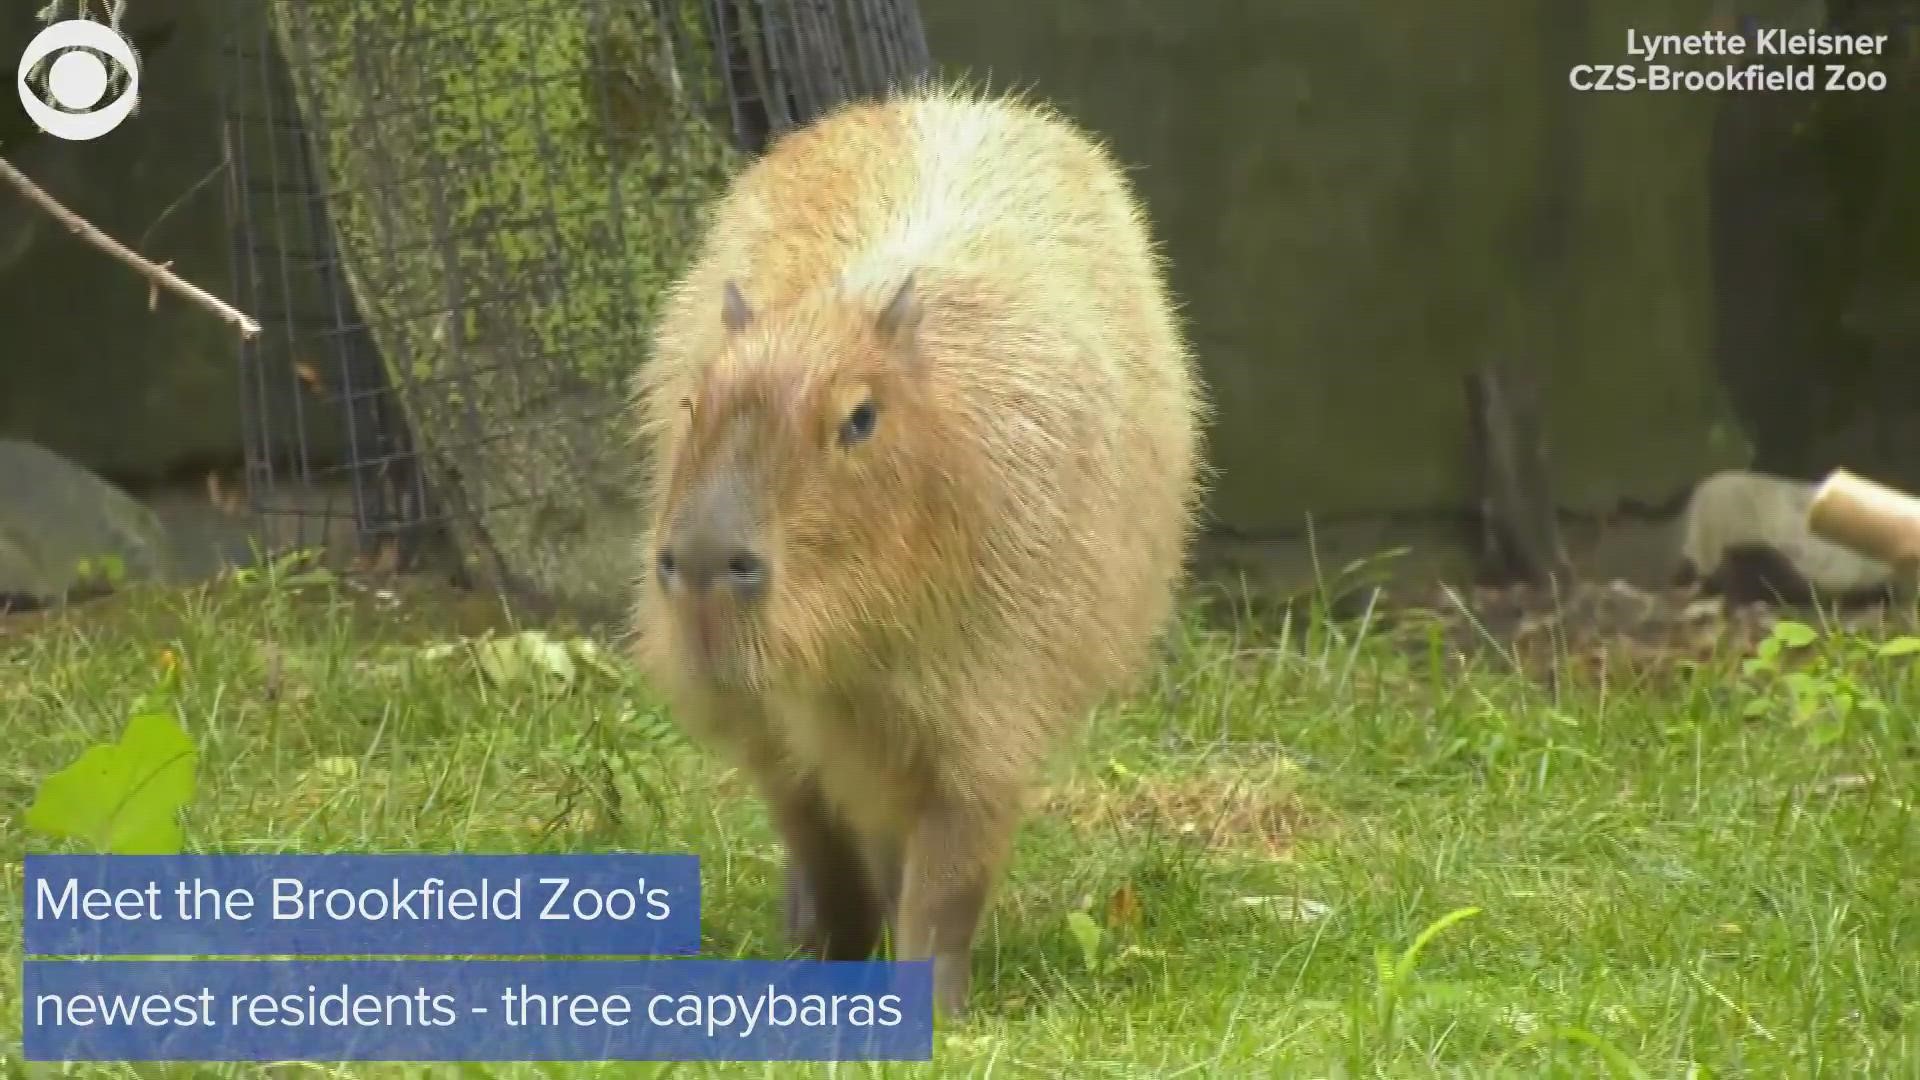 World's largest rodents are newest residents at Brookfield Zoo in Illinois